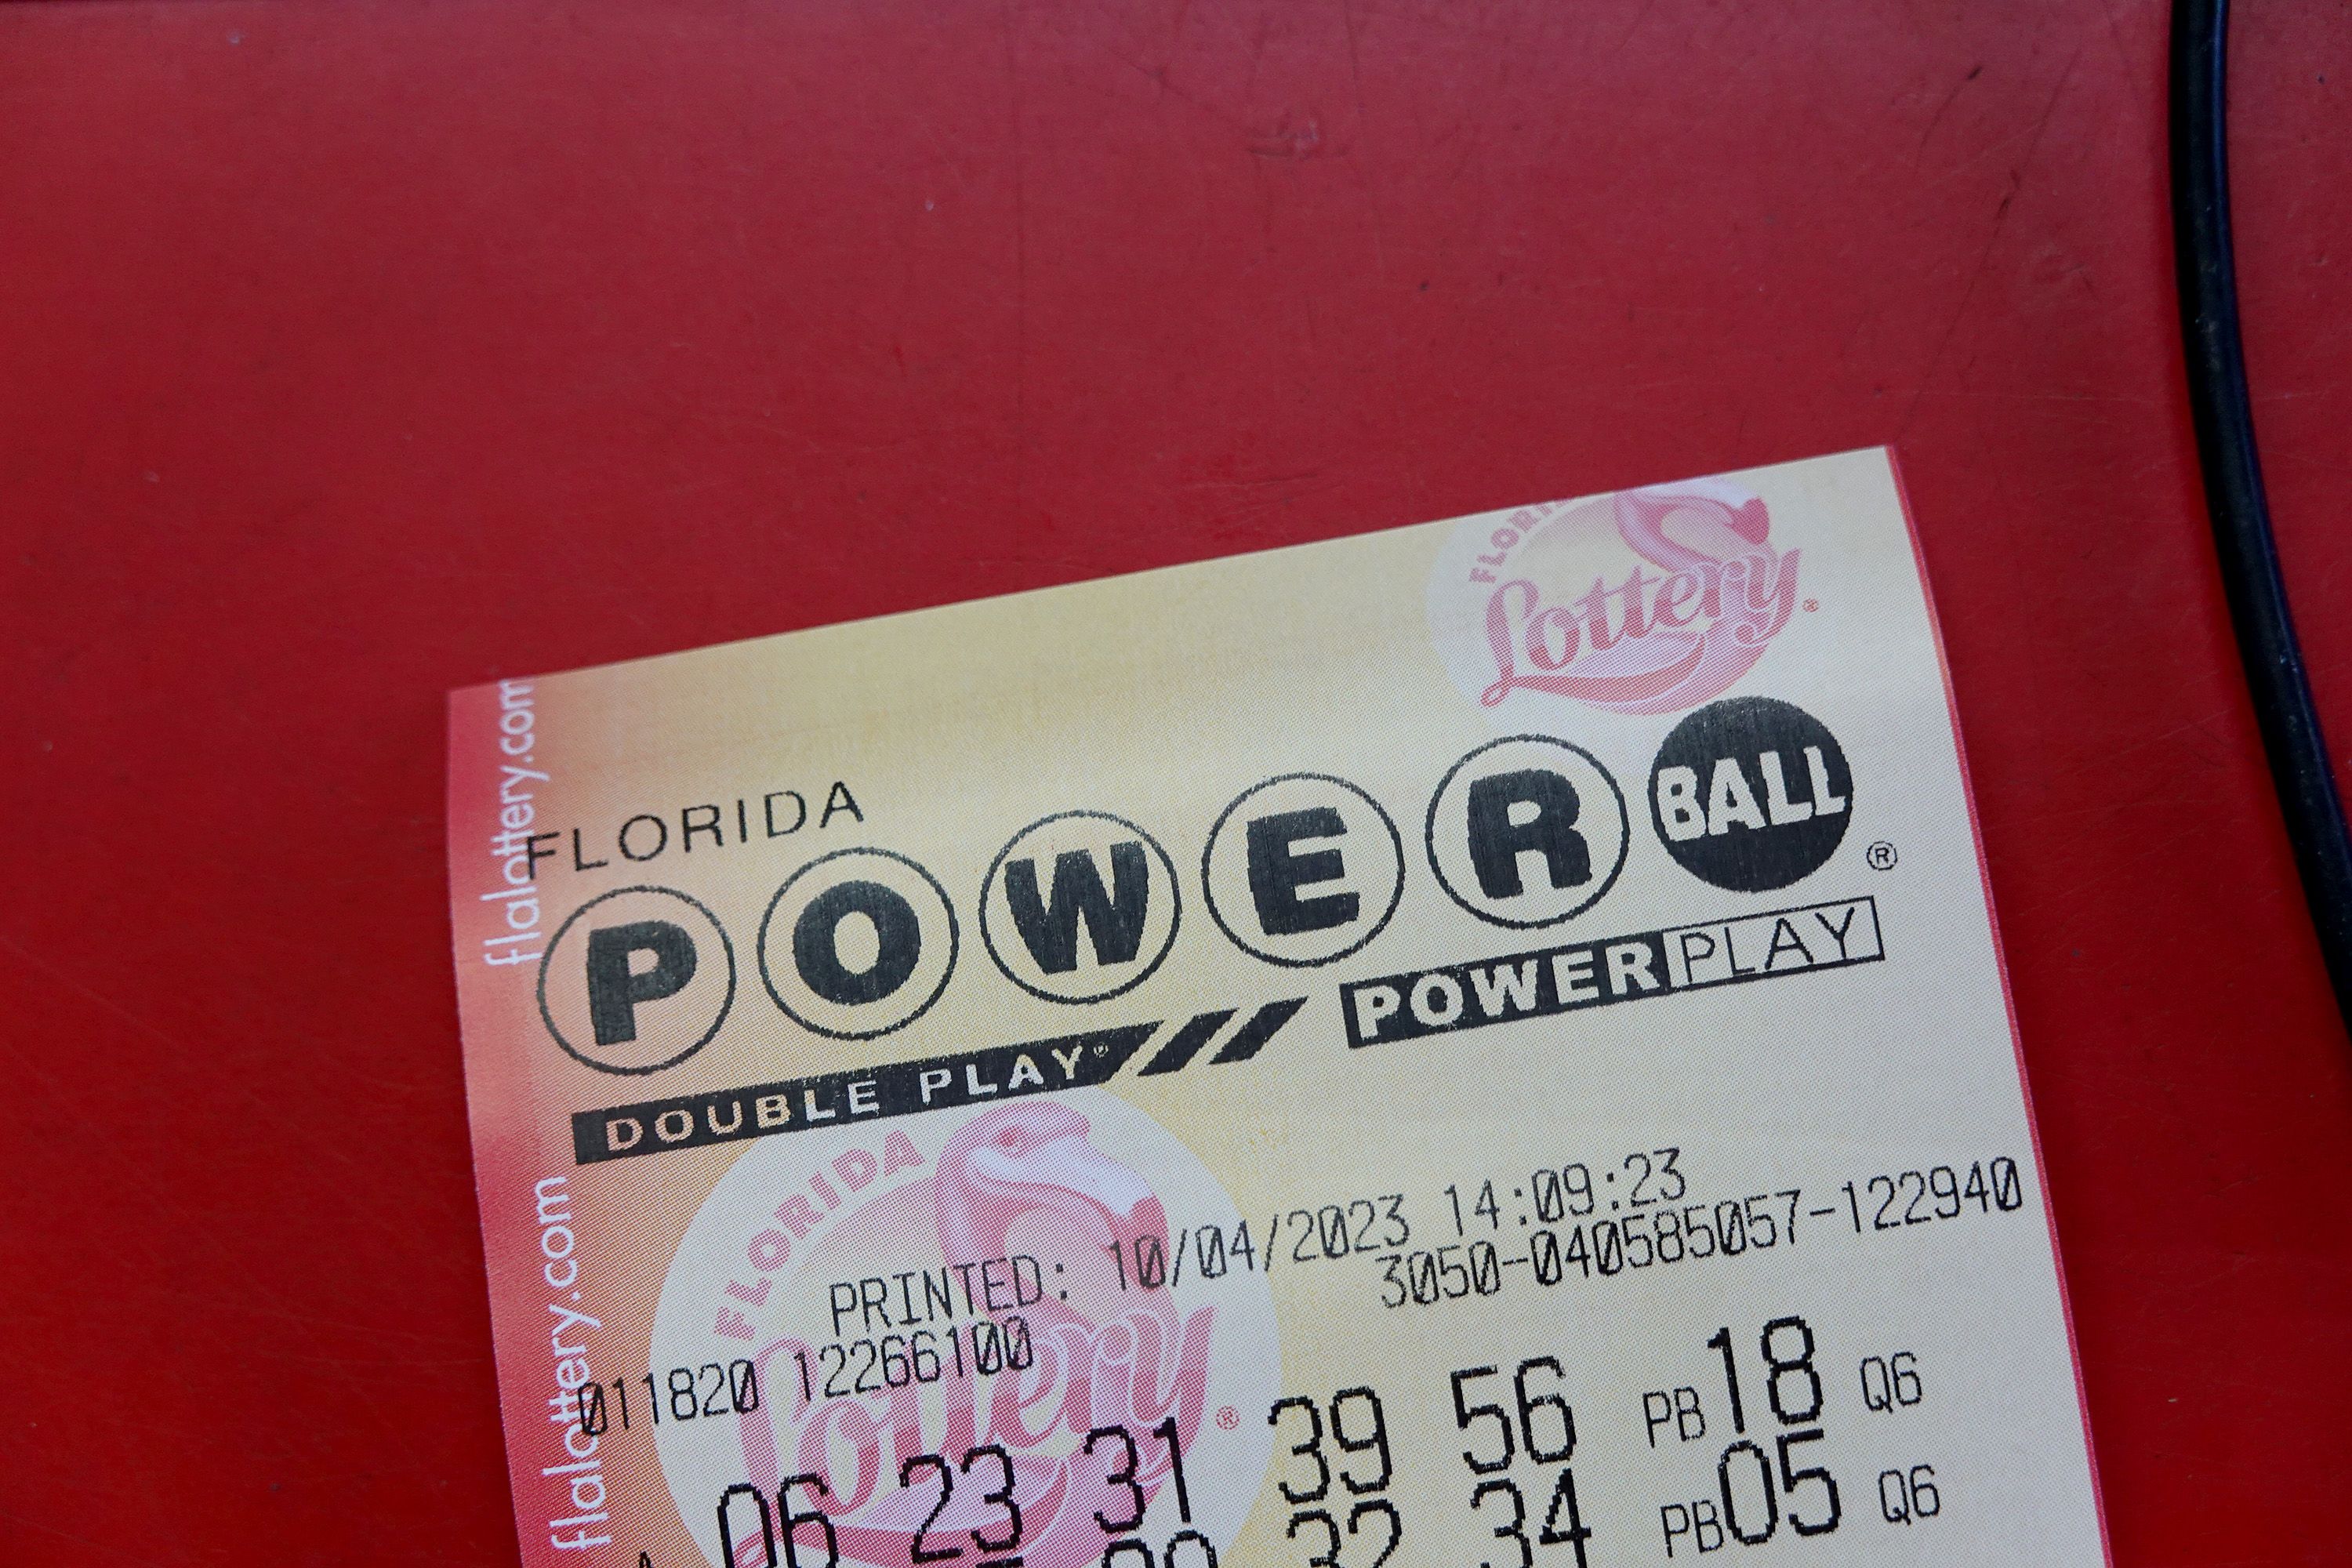 No jackpot winner in Saturday's Powerball drawing, historic prize has now  grown to an estimated $1.55 billion